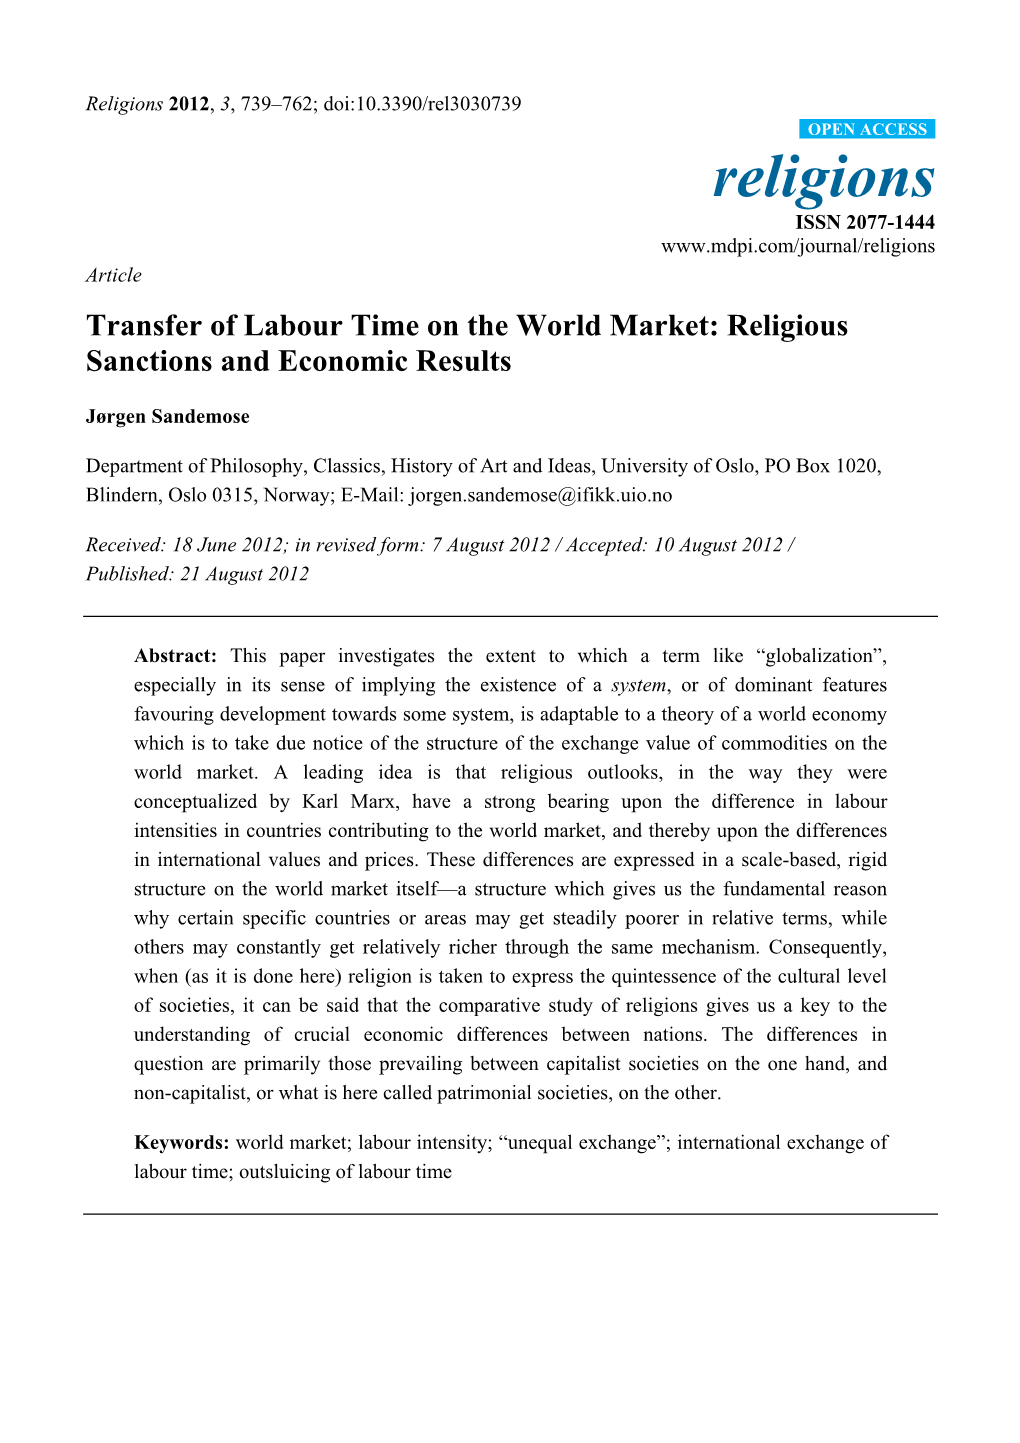 Religious Sanctions and Economic Results